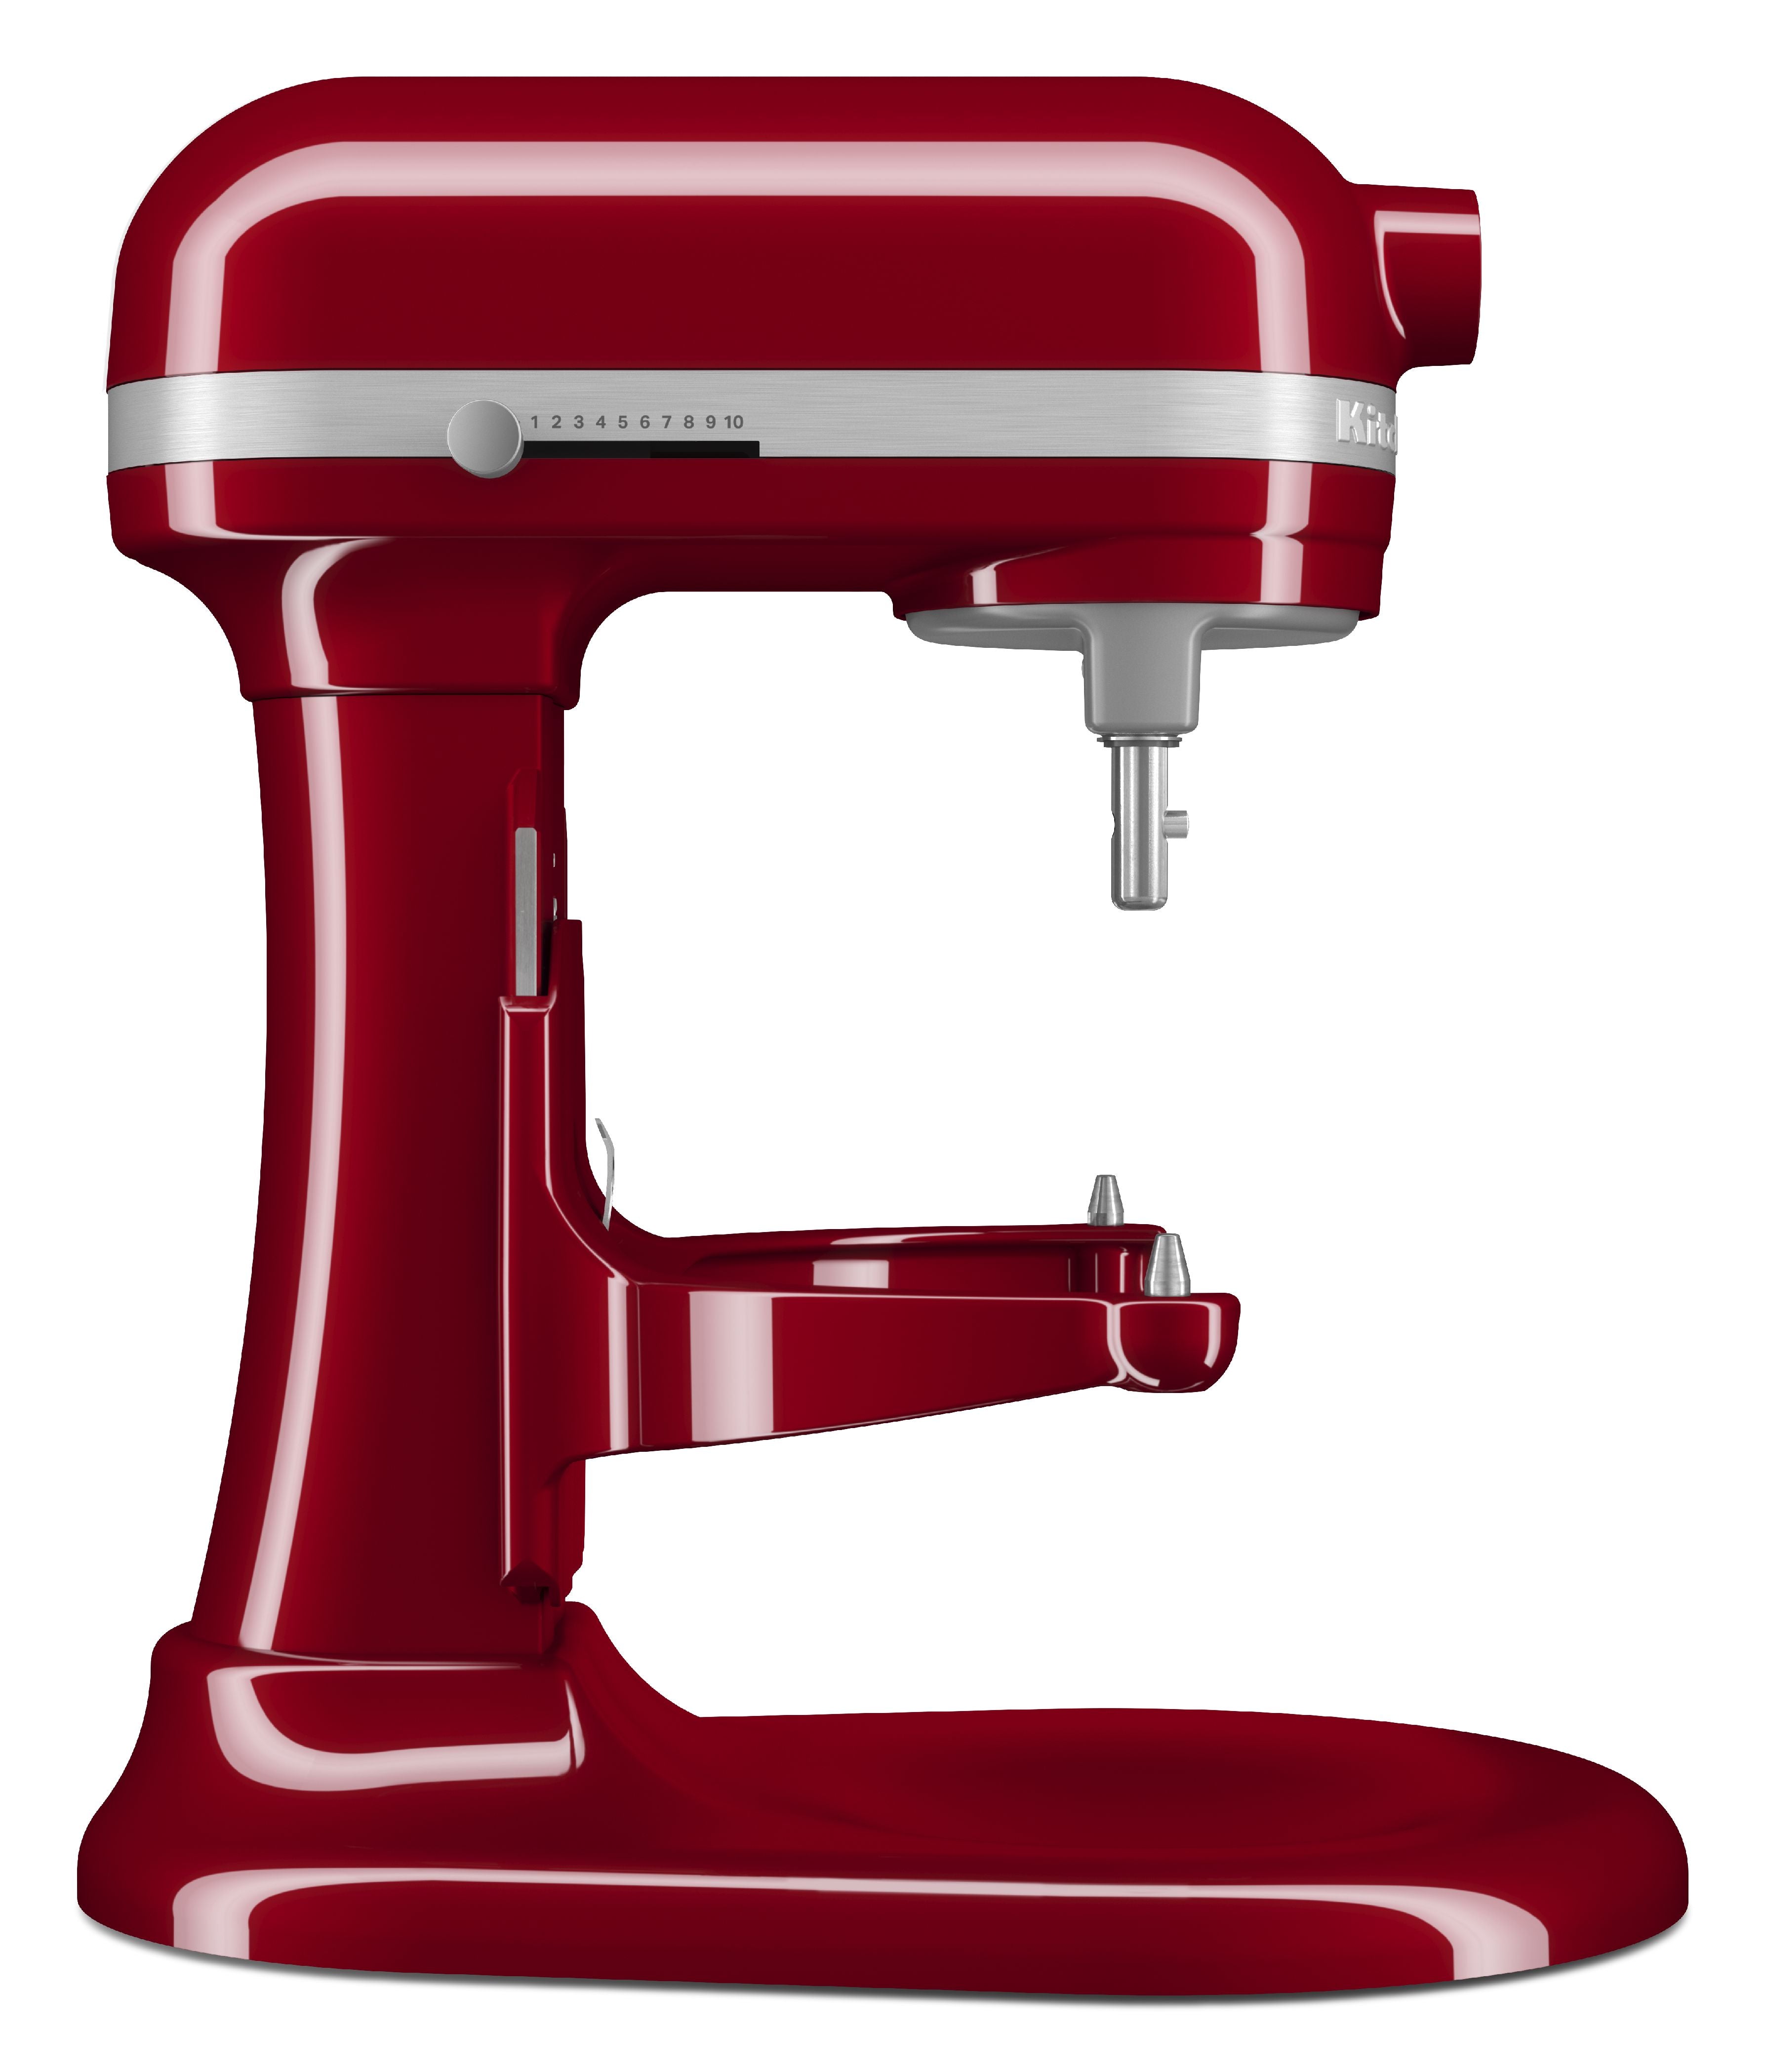 Kitchen Aid High Duty Bowl Lift Stand Mixer 6,6 L, Empired Red